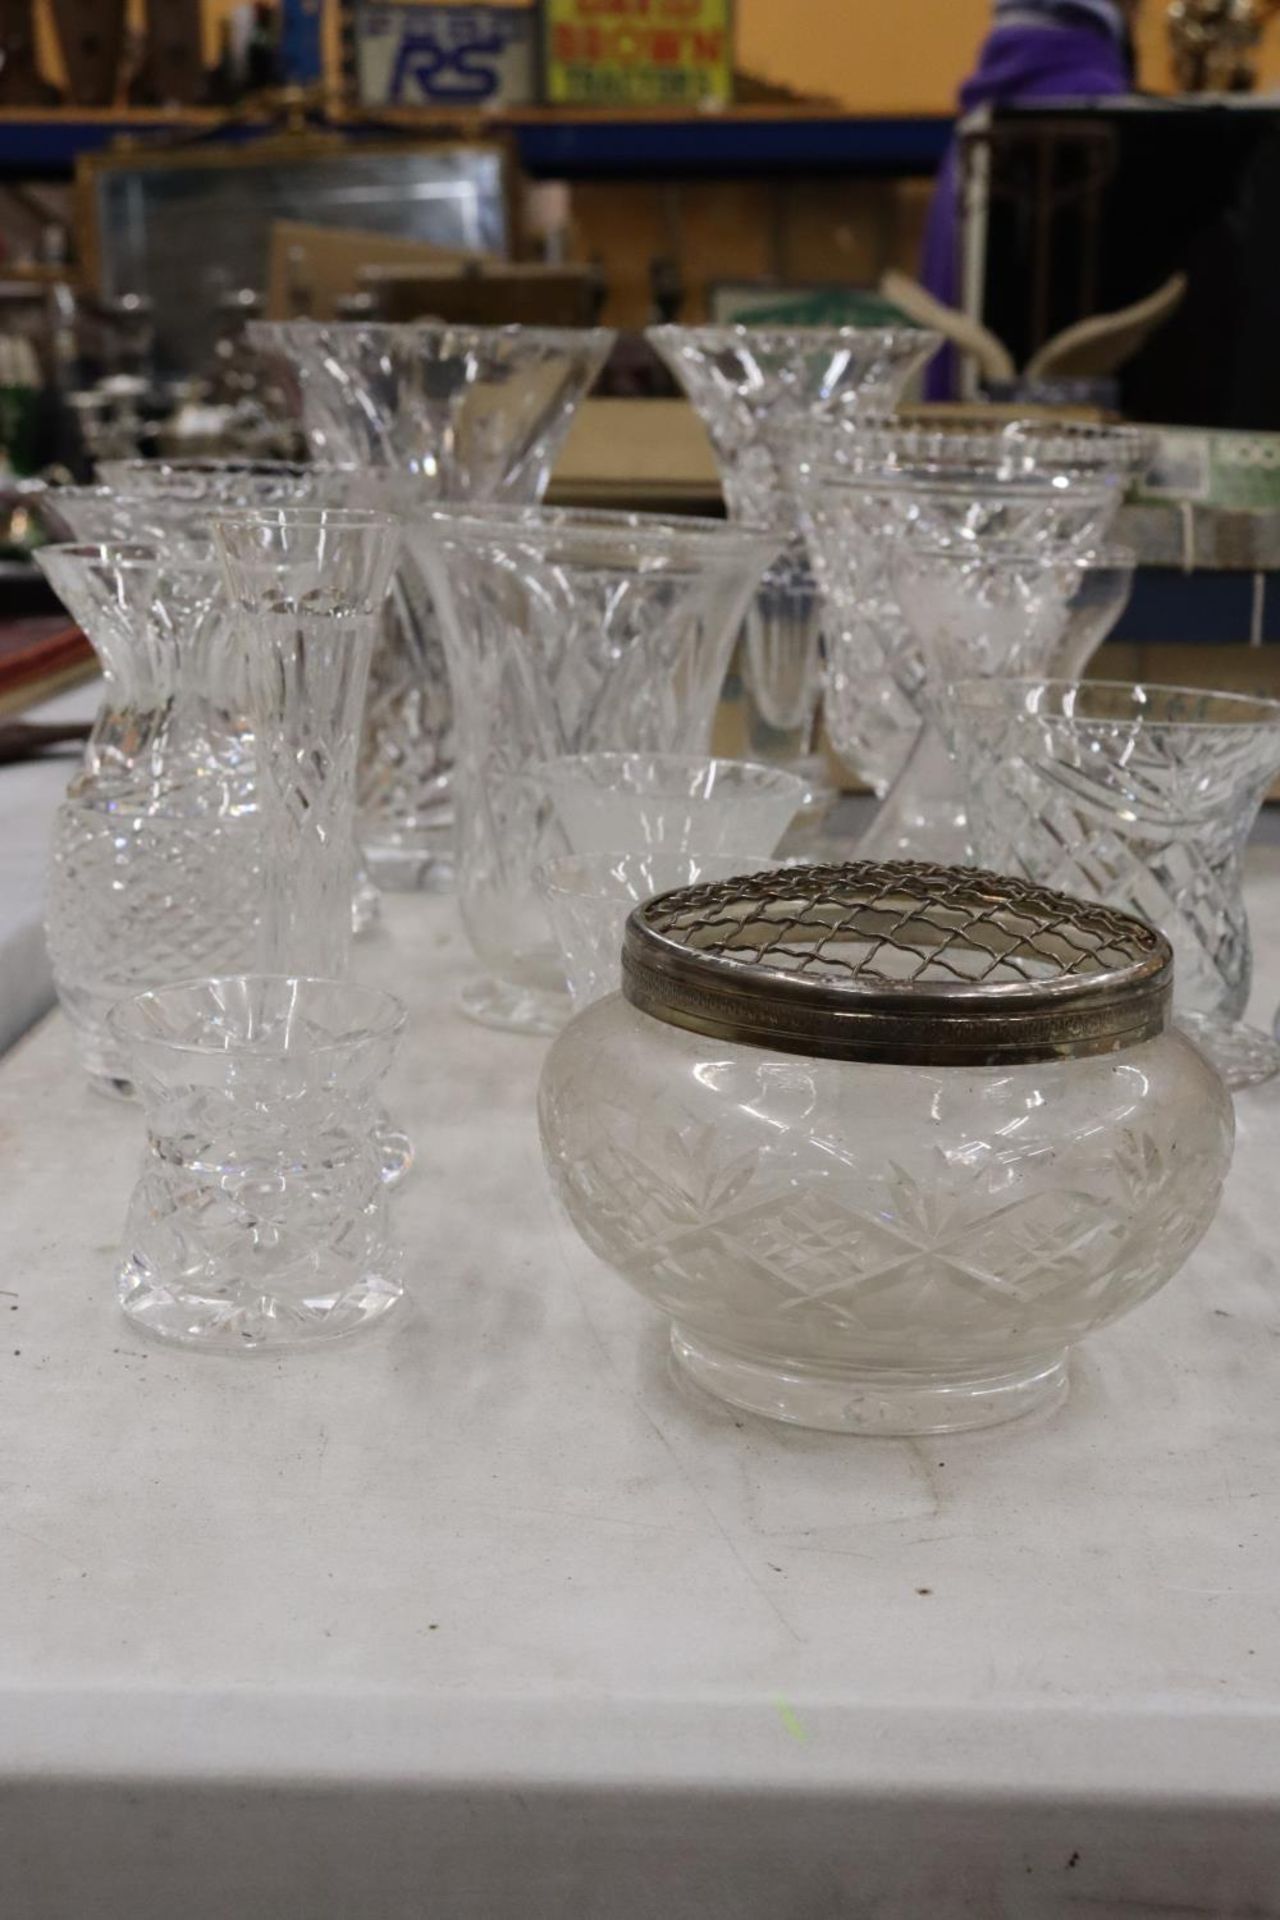 A LARGE QUANTITY OF GLASSWARE TO INCLUDE VASES AND ROSE BOWLS - Image 4 of 6